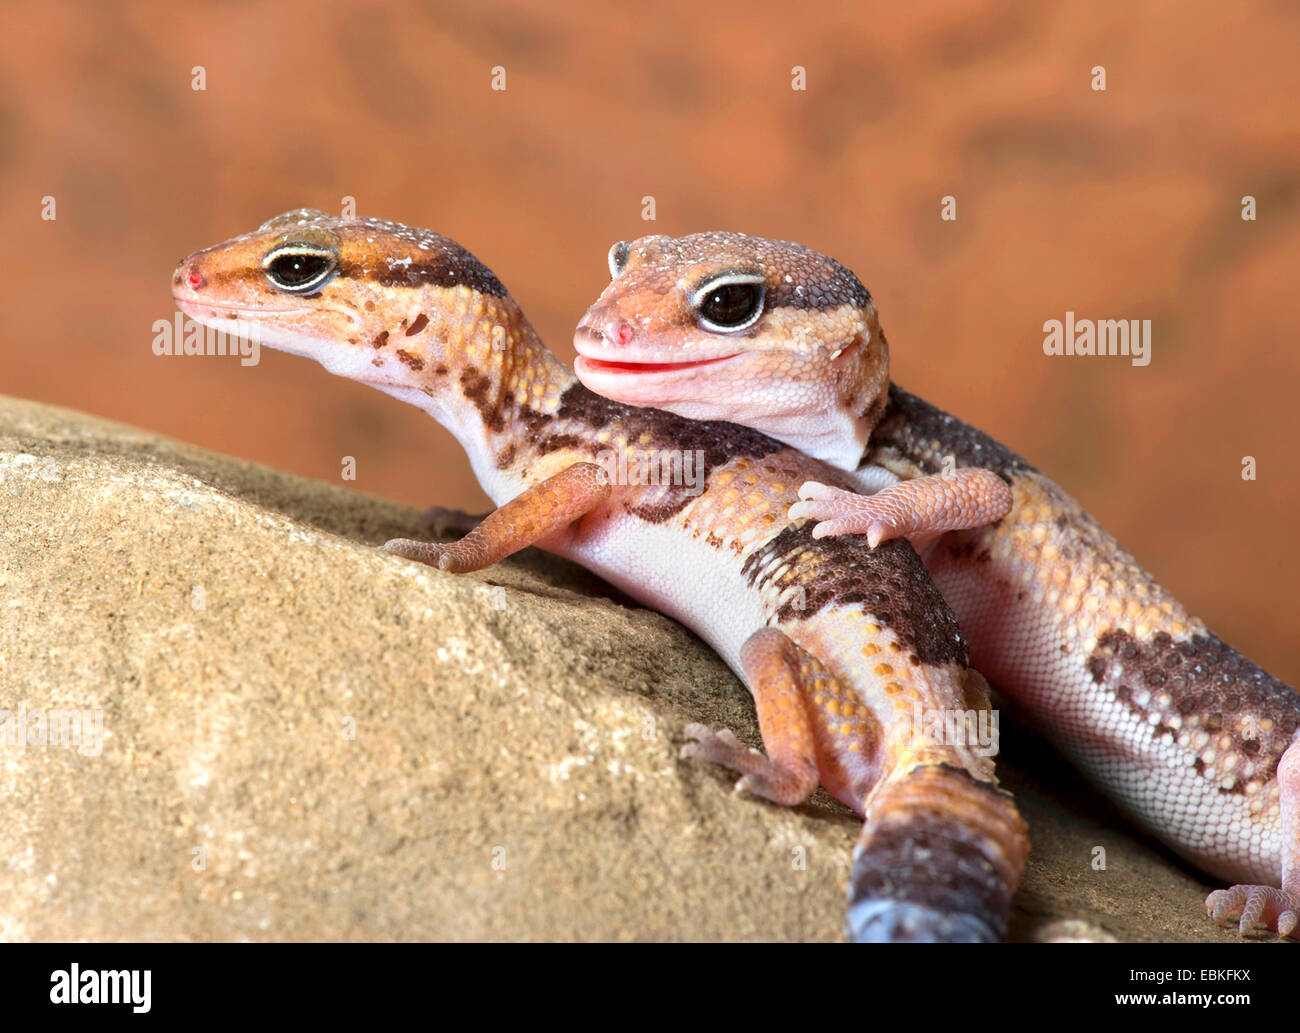 Fat-tailed gecko, African Fat-tailed Gecko (Hemitheconyx caudicinctus), two Fat-tailed geckos Stock Photo